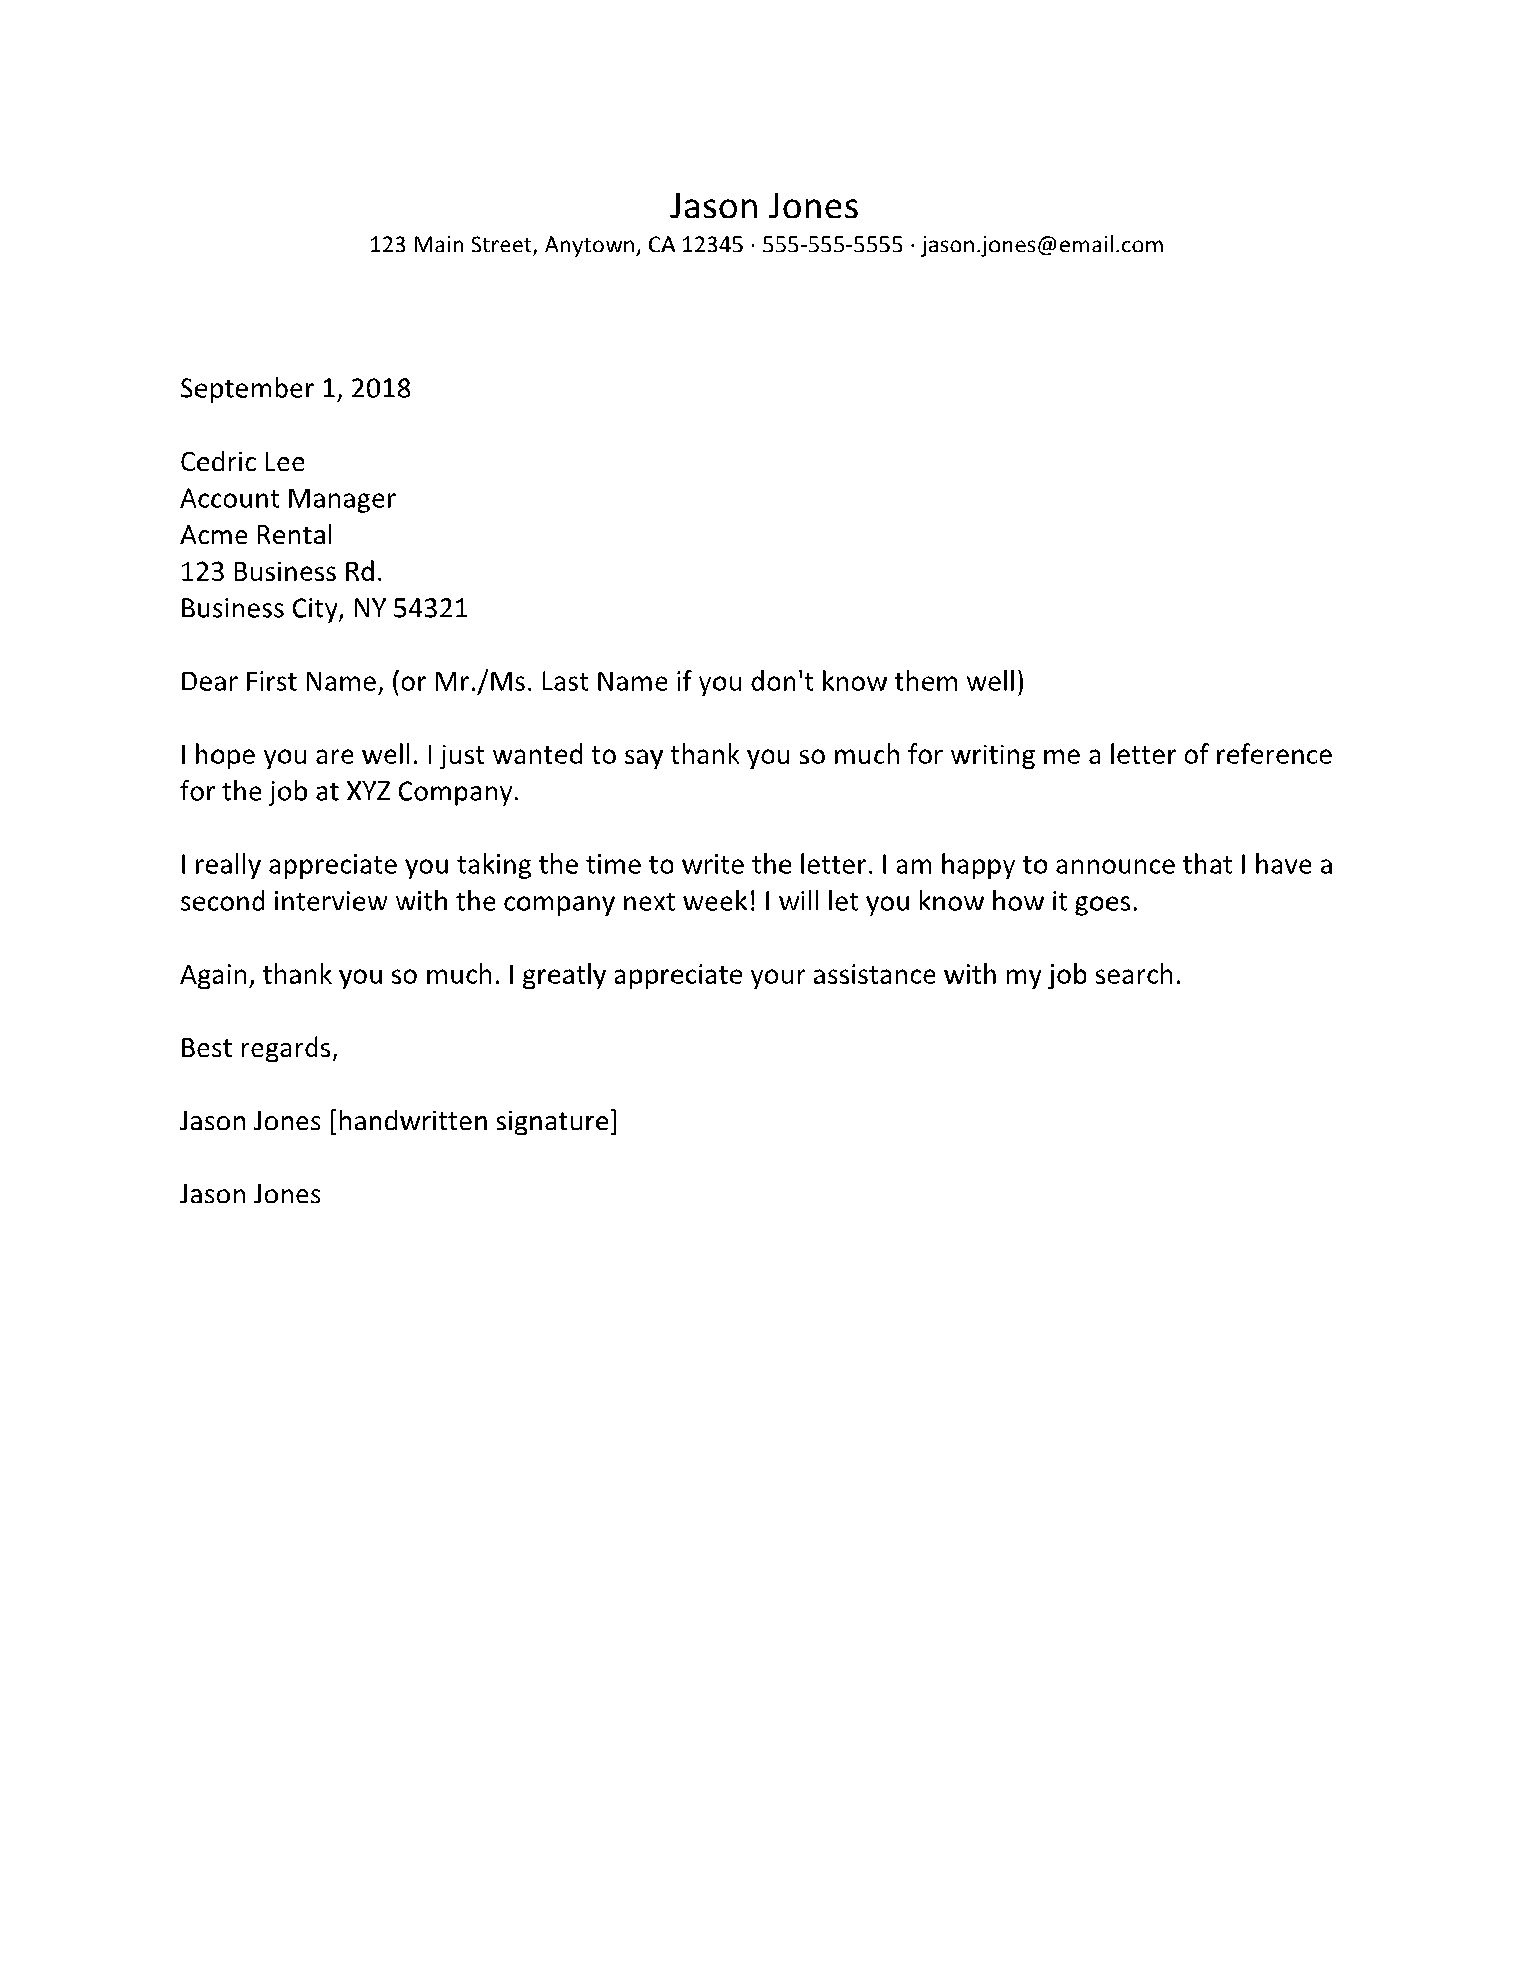 Thank you Letter for Recommendation 1